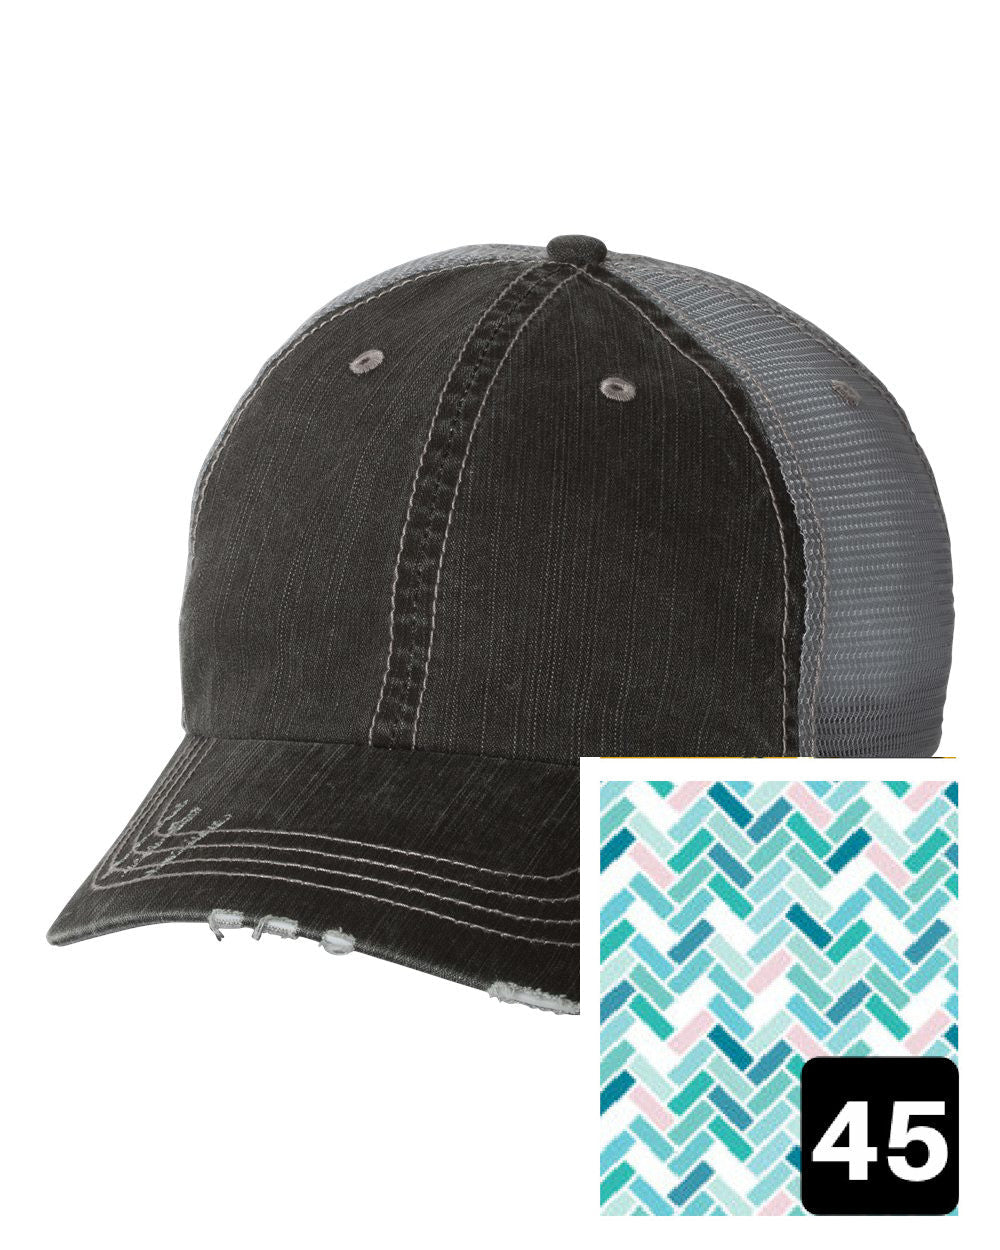 gray distressed trucker hat with pink star graphic fabric state of Georgia